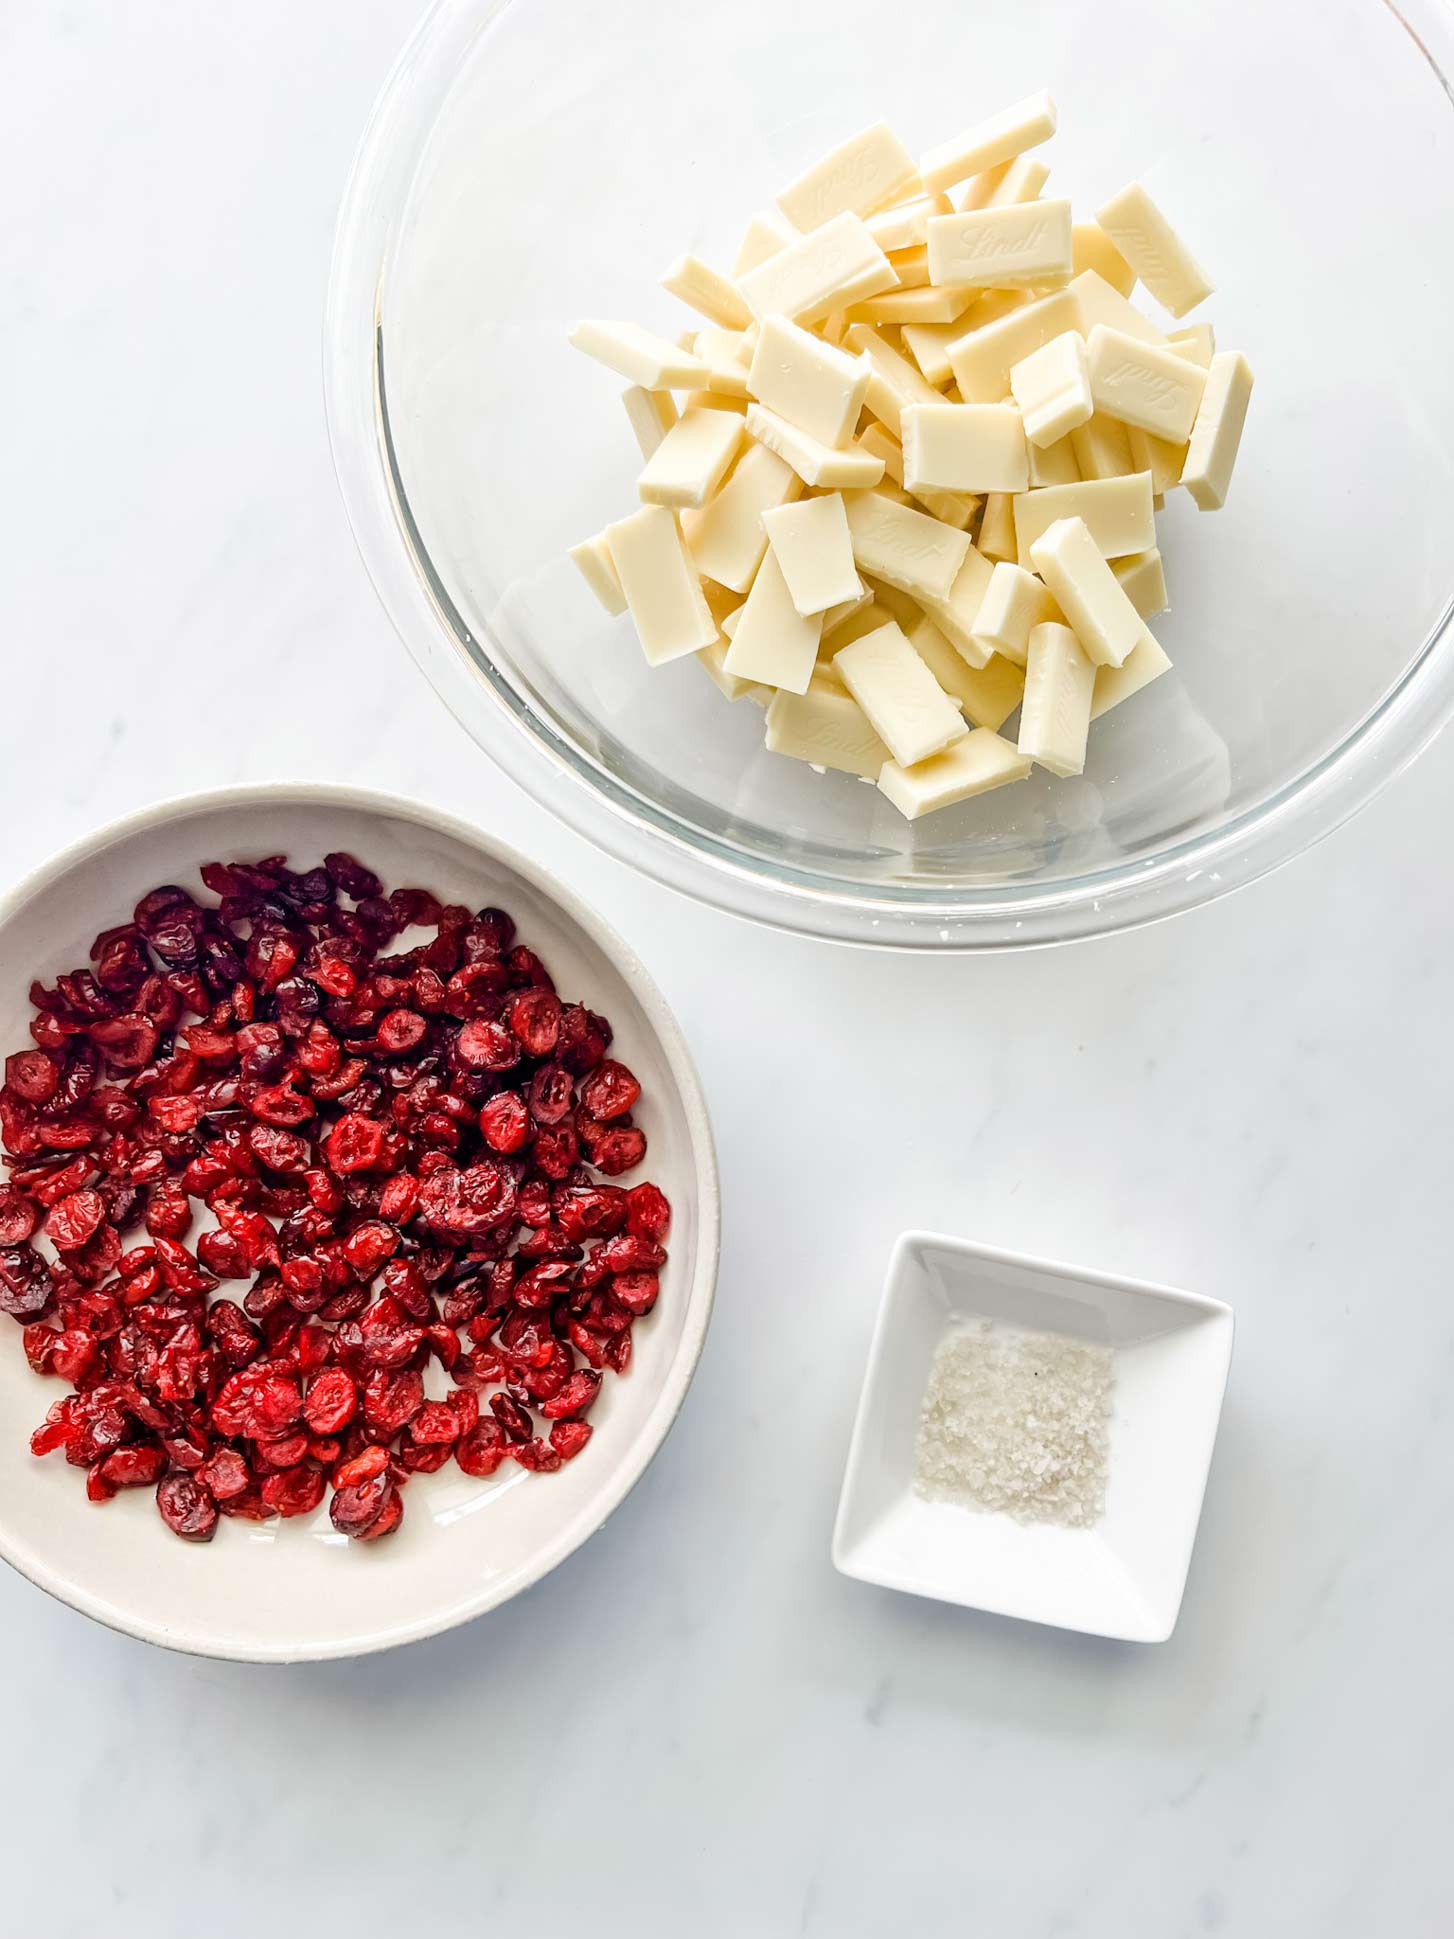 Overhead photo of a bowl of chopped white chocolate, a bowl of cranberries and a small dish of flakey salt.